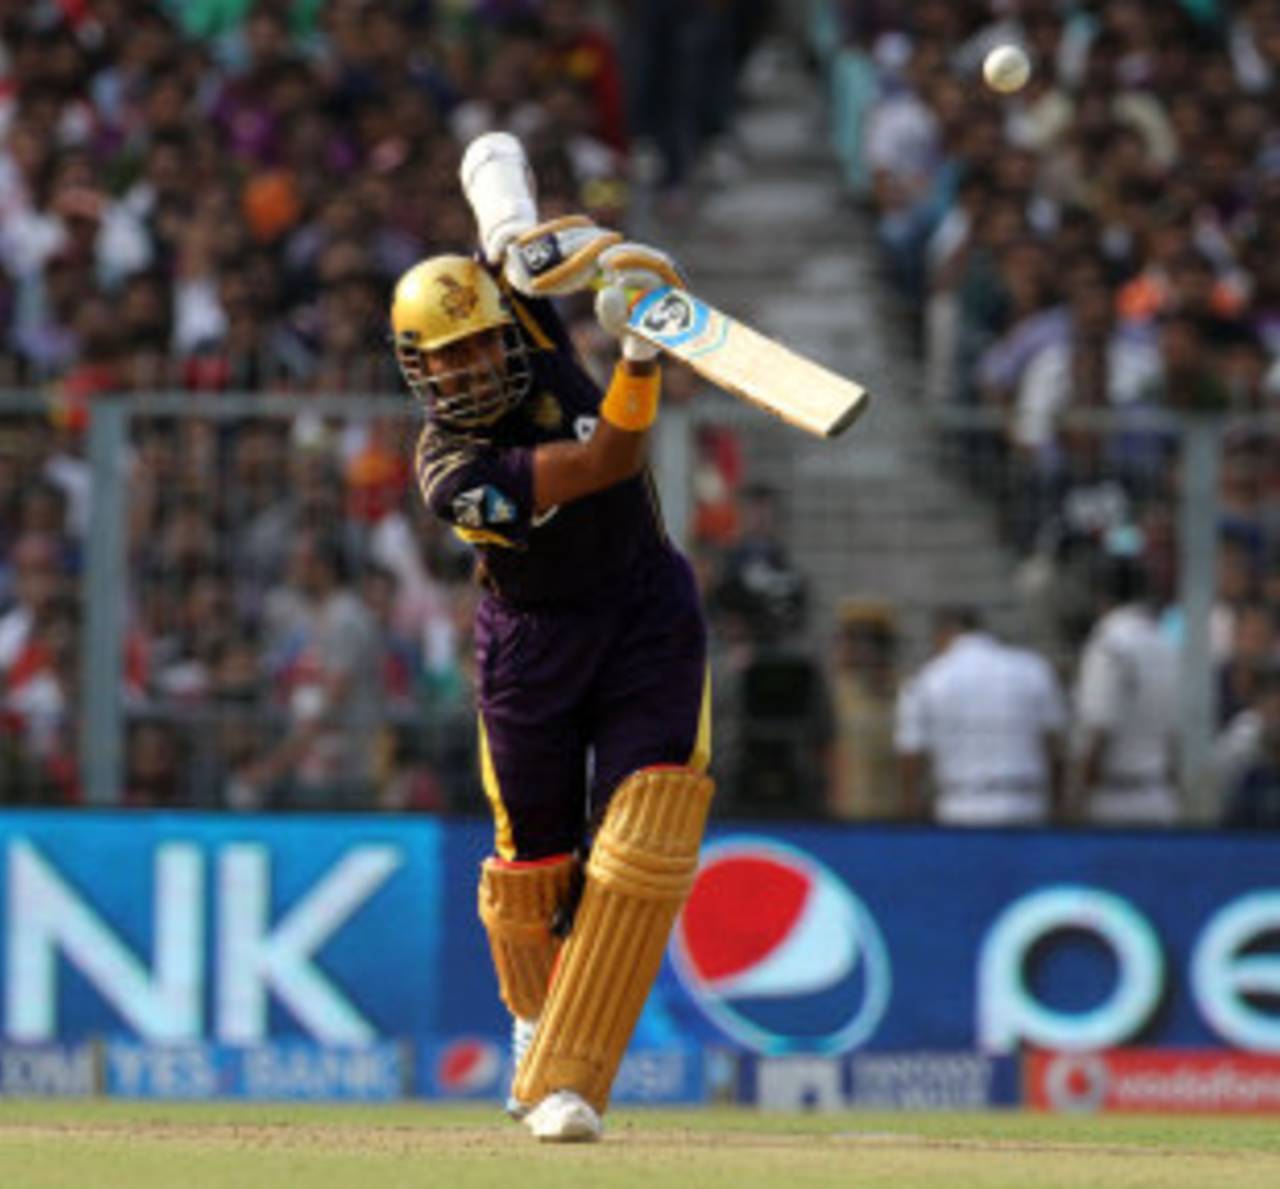 Pravin Amre on Robin Uthappa: "Earlier, he used to hit over midwicket effortlessly. But he has become better at timing and playing technically correct shots."&nbsp;&nbsp;&bull;&nbsp;&nbsp;BCCI